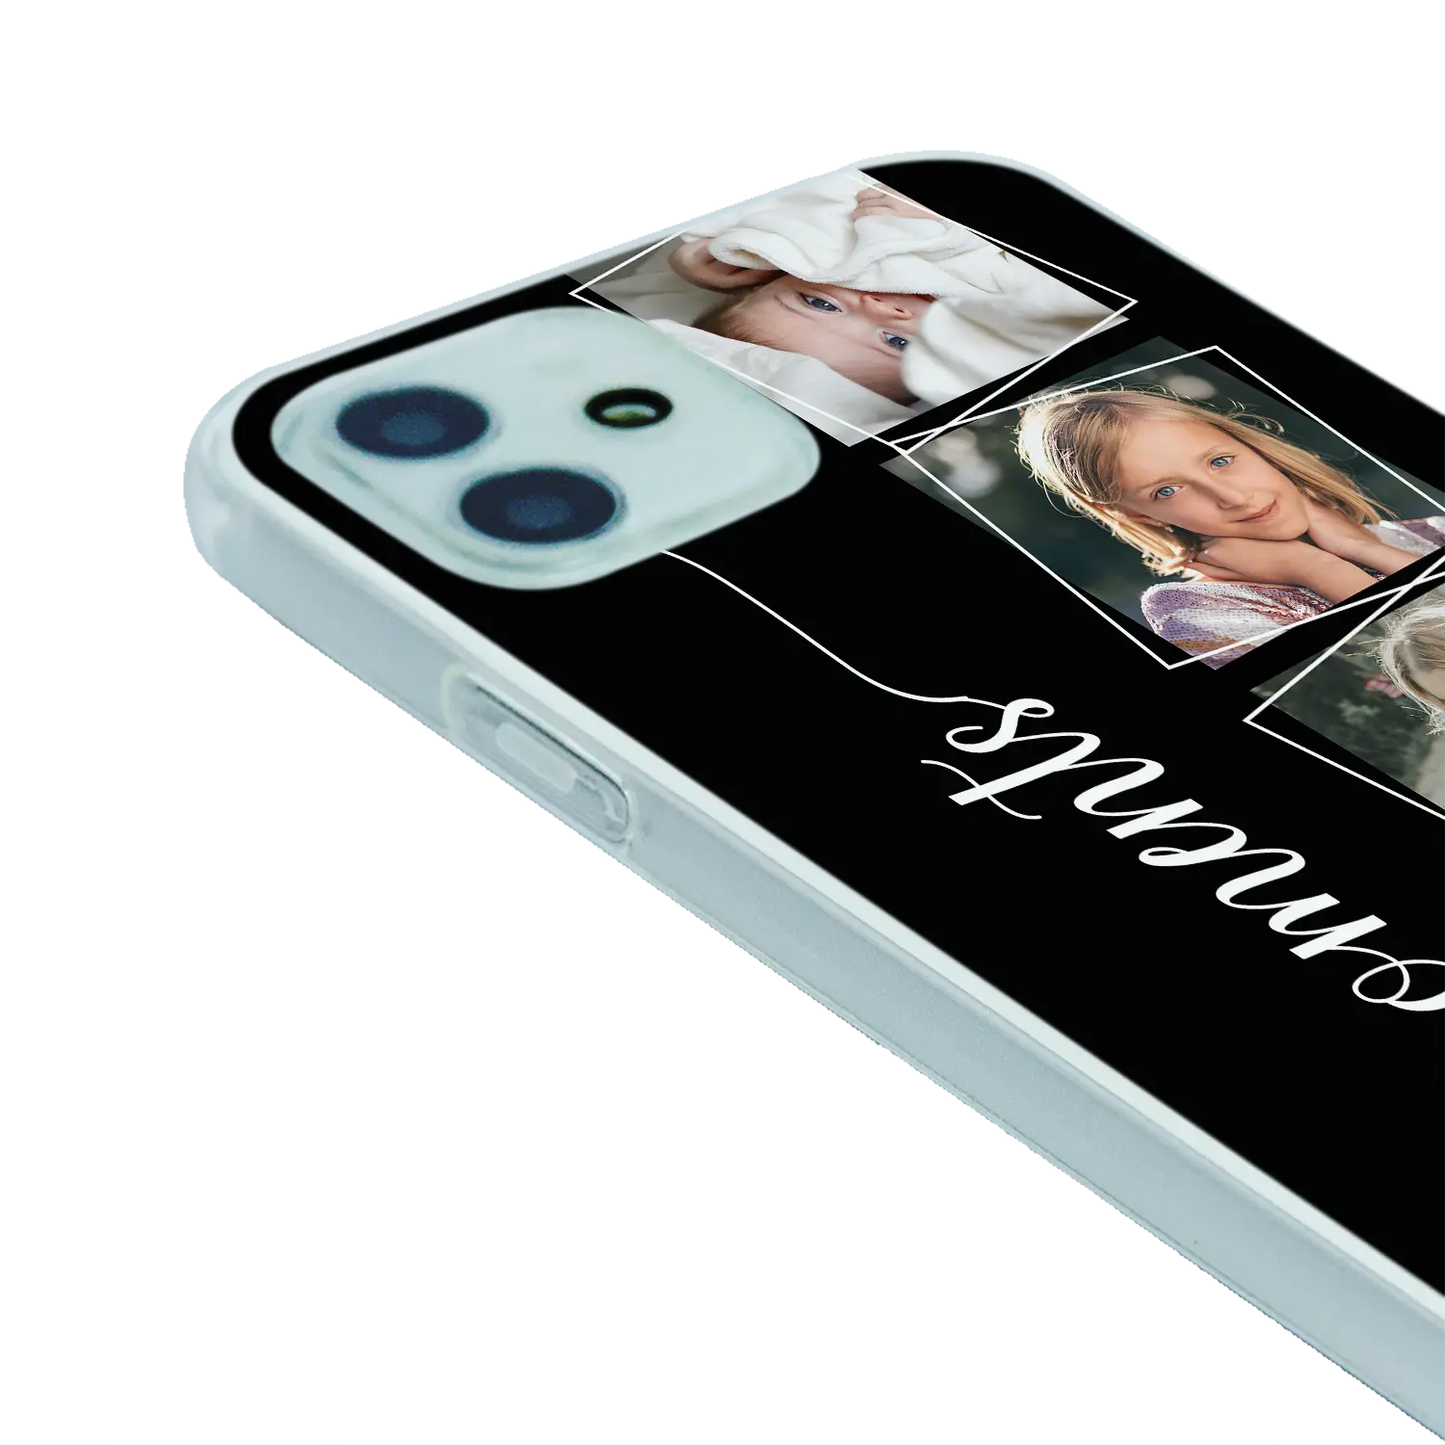 Moments - Personalised iPhone Case